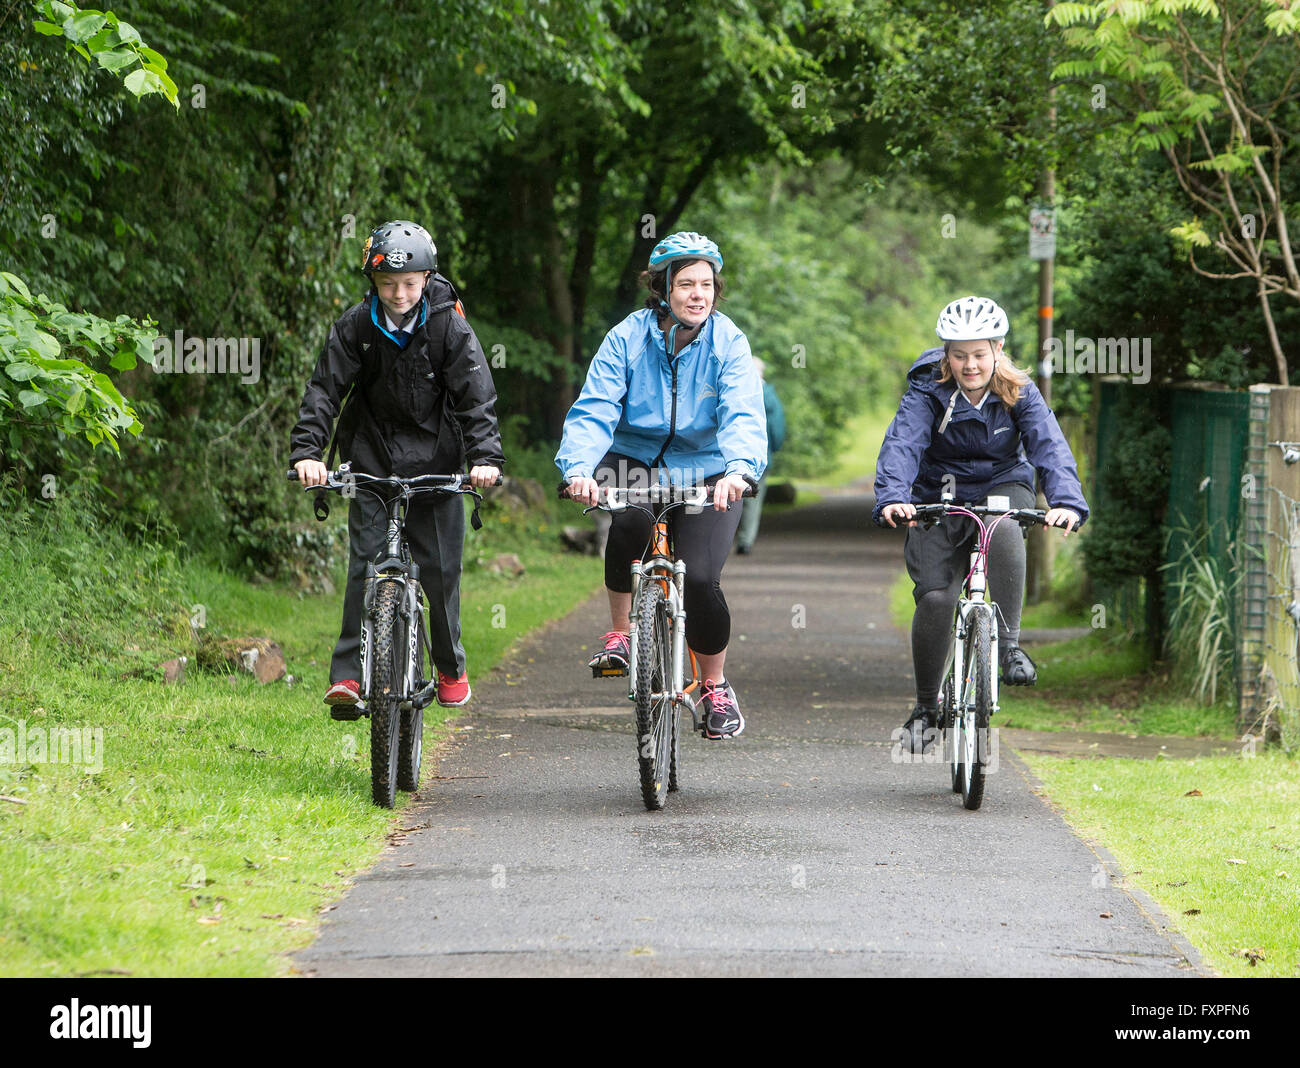 Children safely cycling to school with adult supervision on pathways Stock Photo